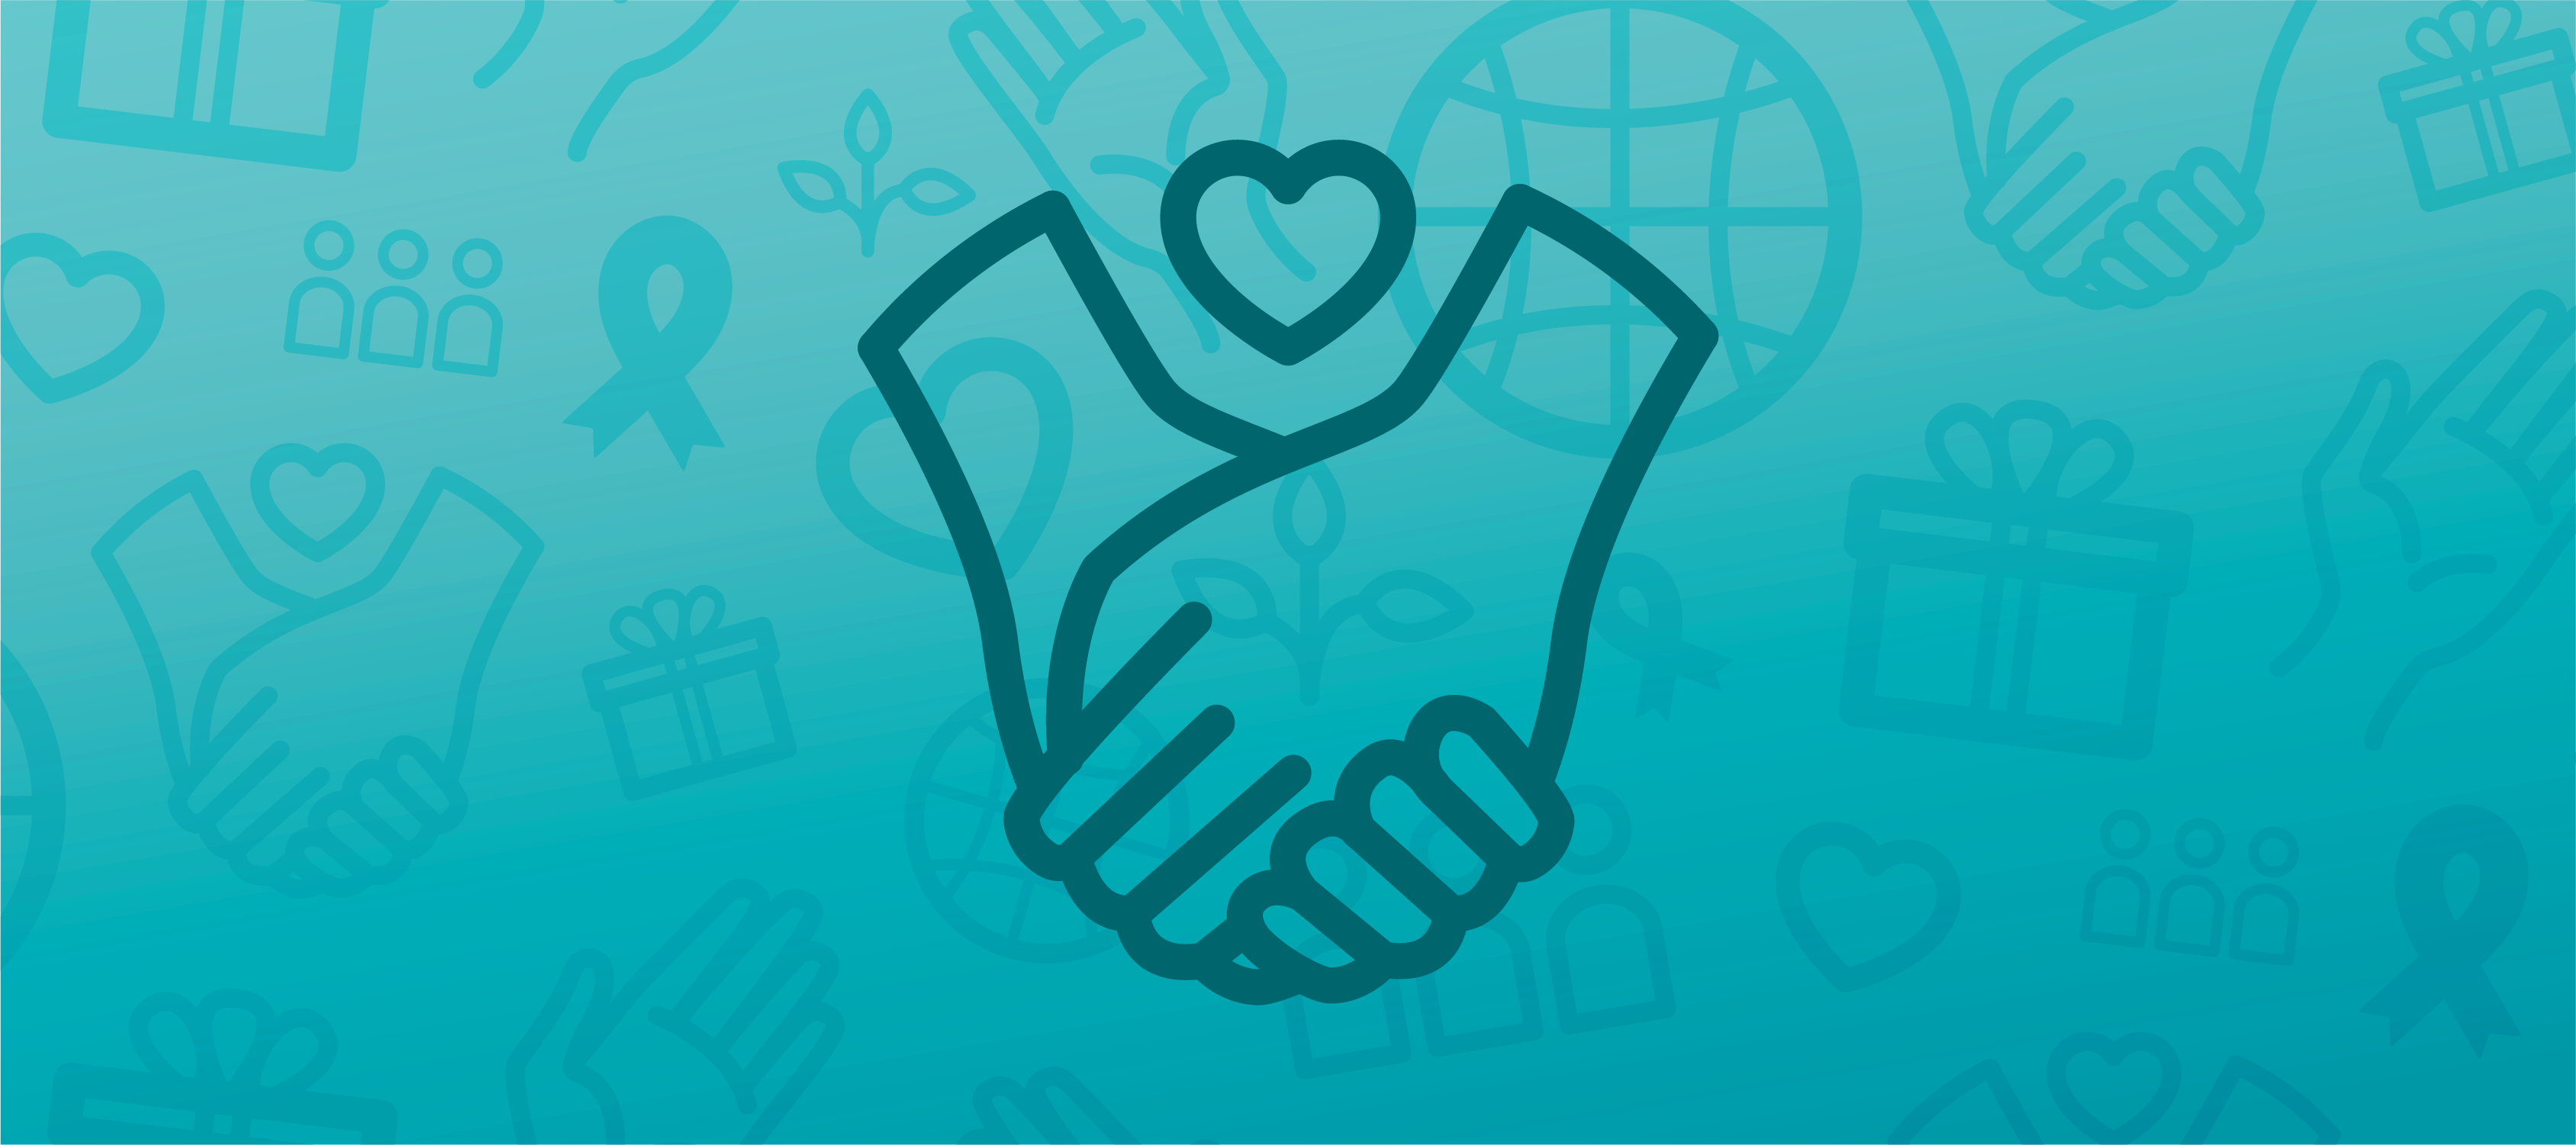 A blue header image featuring an icon of hands holding each other with a heart above them in the center and faded helping icons in the background